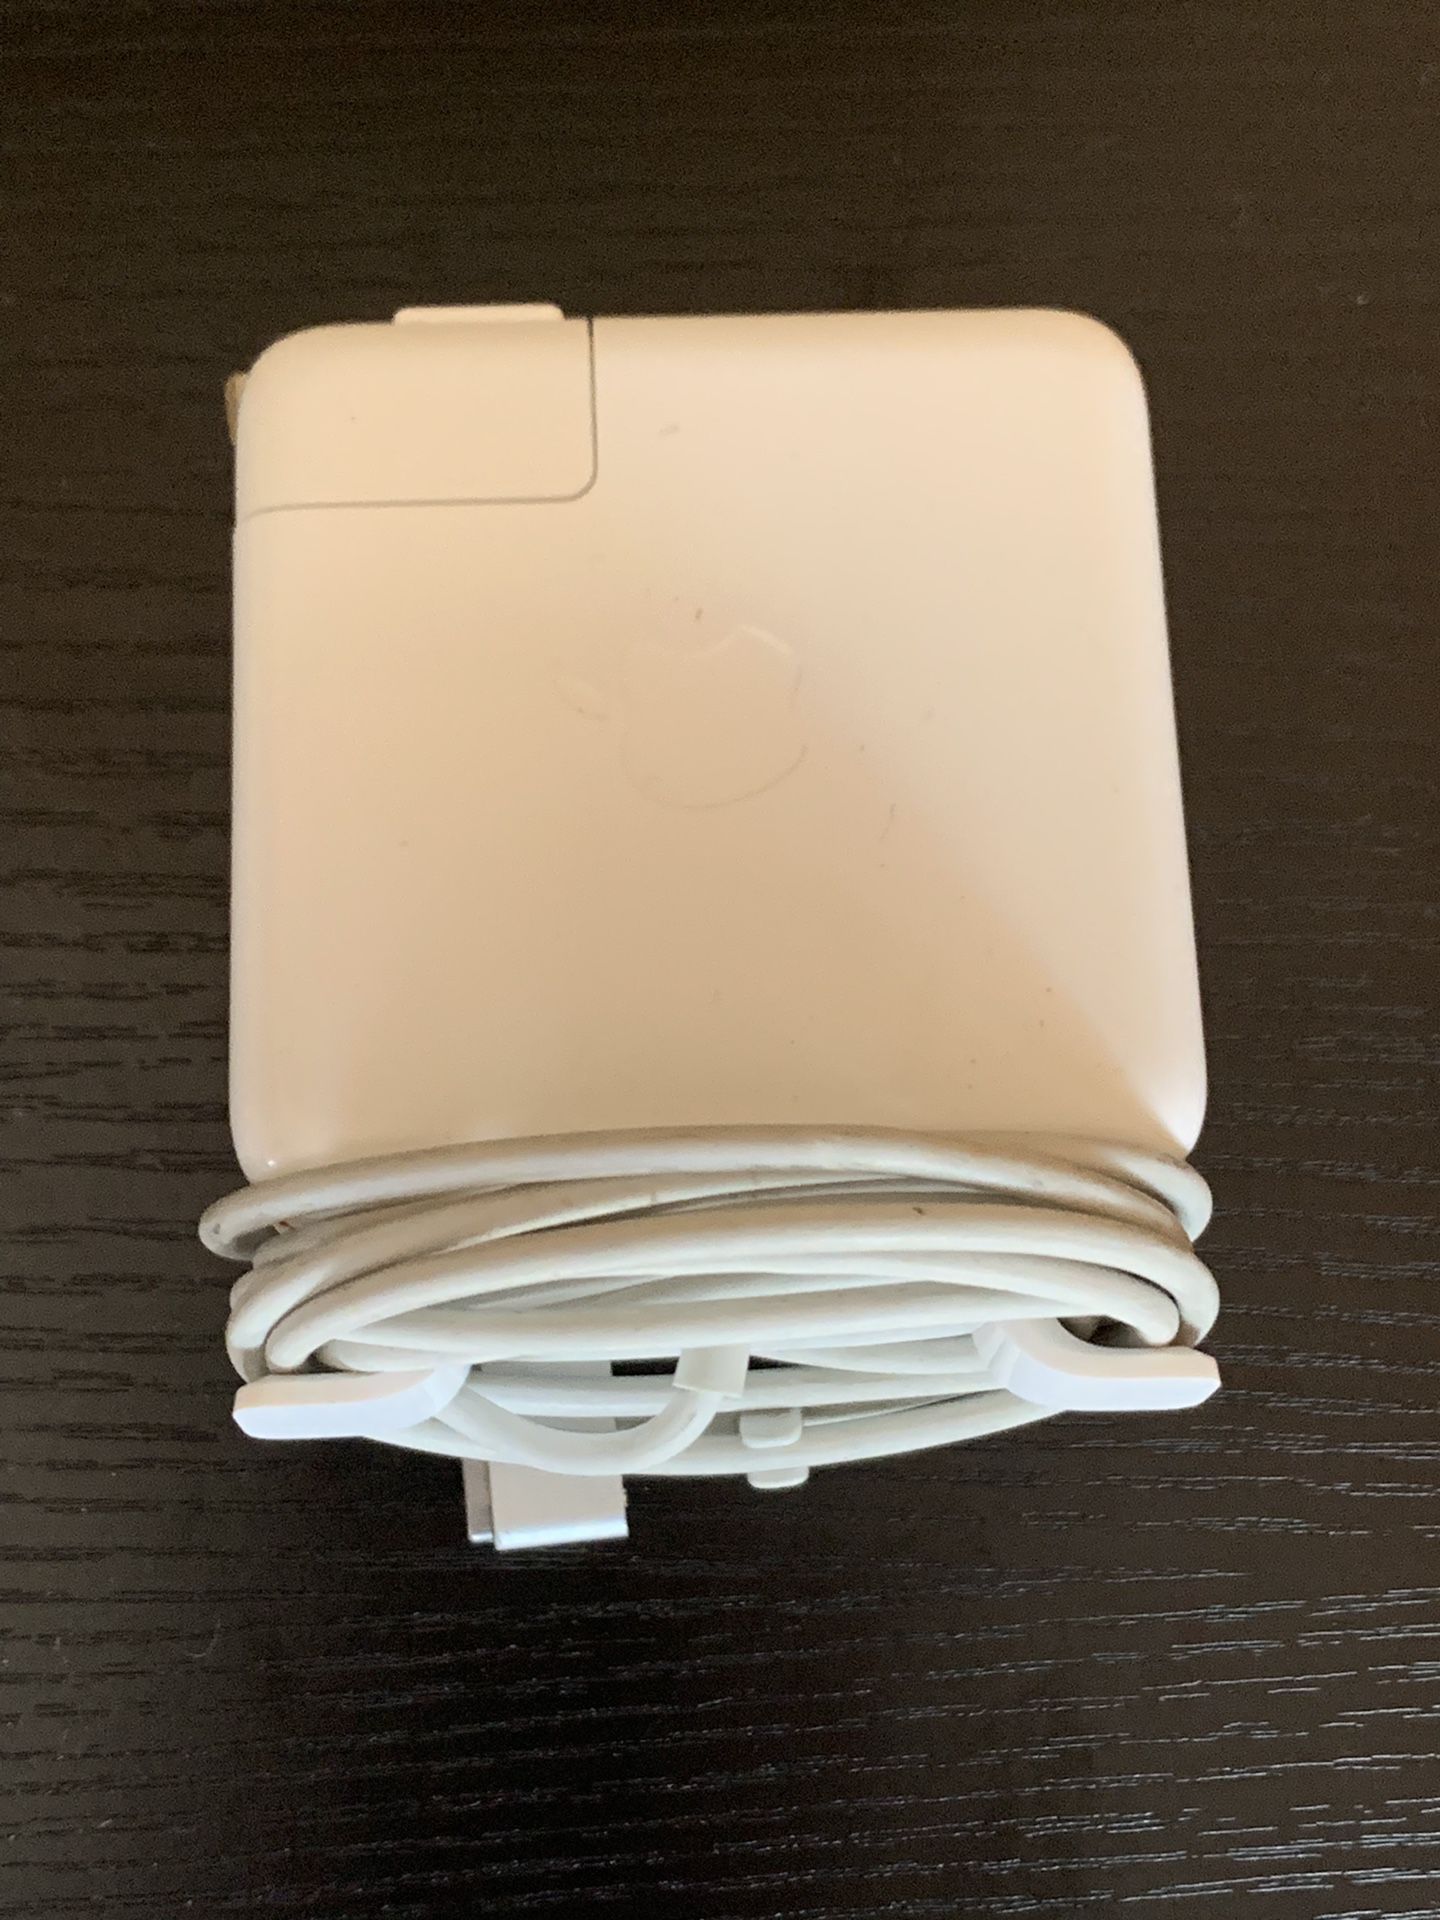 Apple 60W Mega Sage 2 power Adapter. Excellent condition pick up only